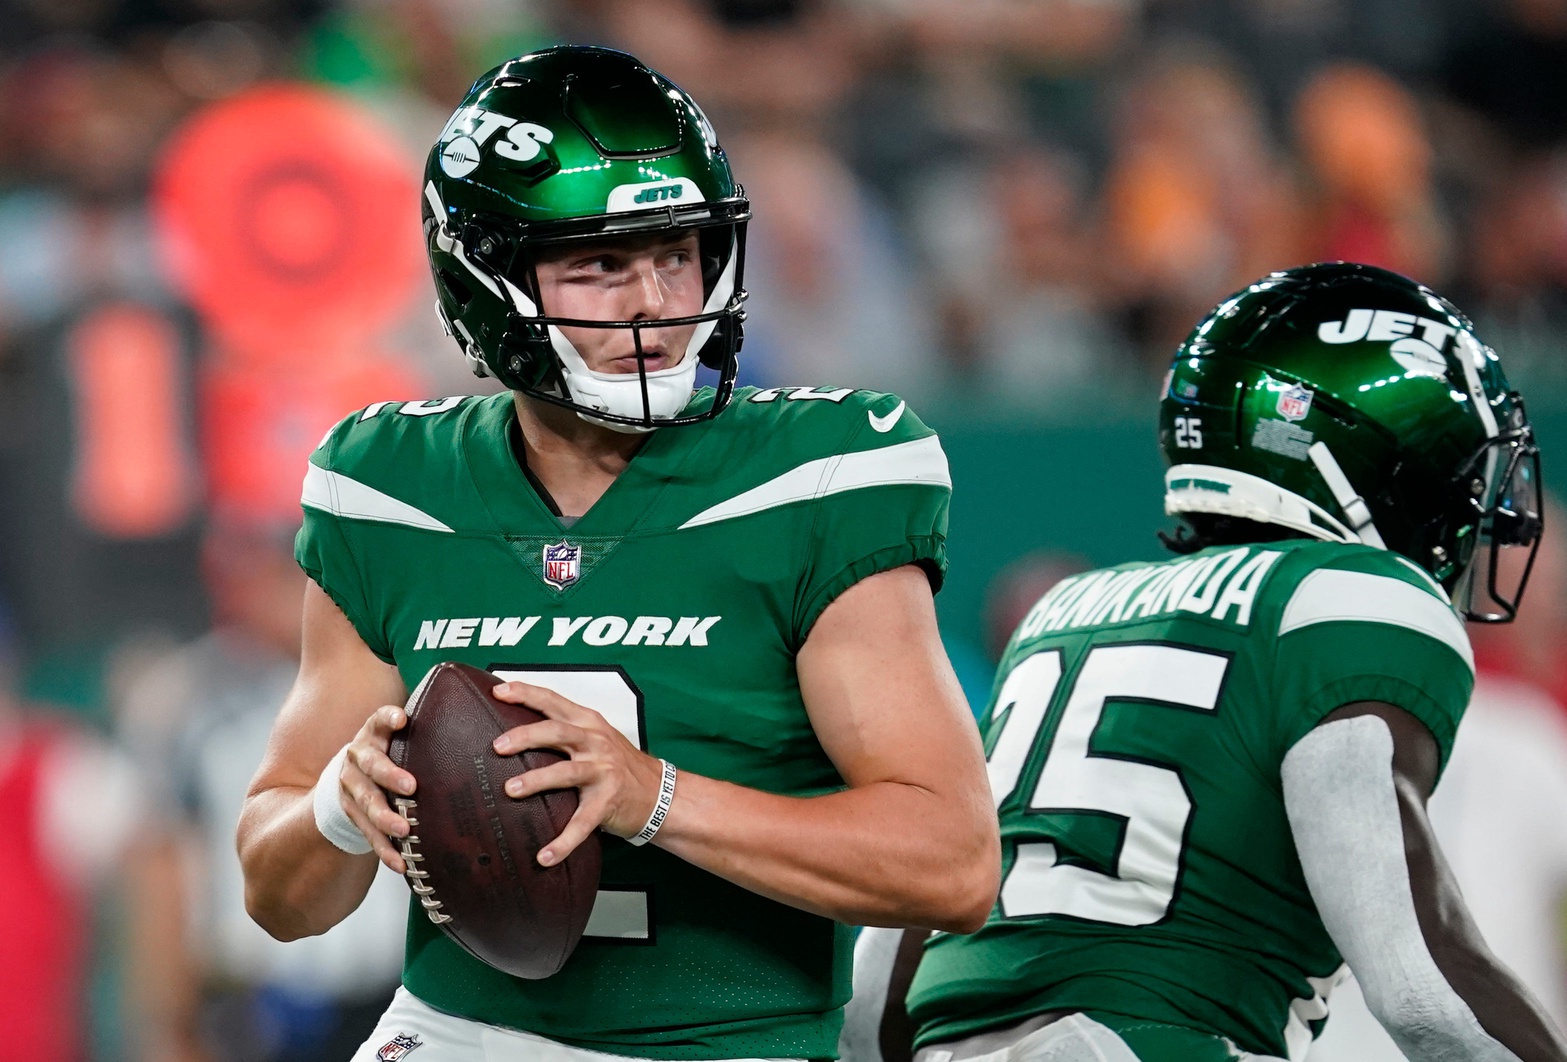 New York Jets: Comparing Mike White's first start to Zach Wilson